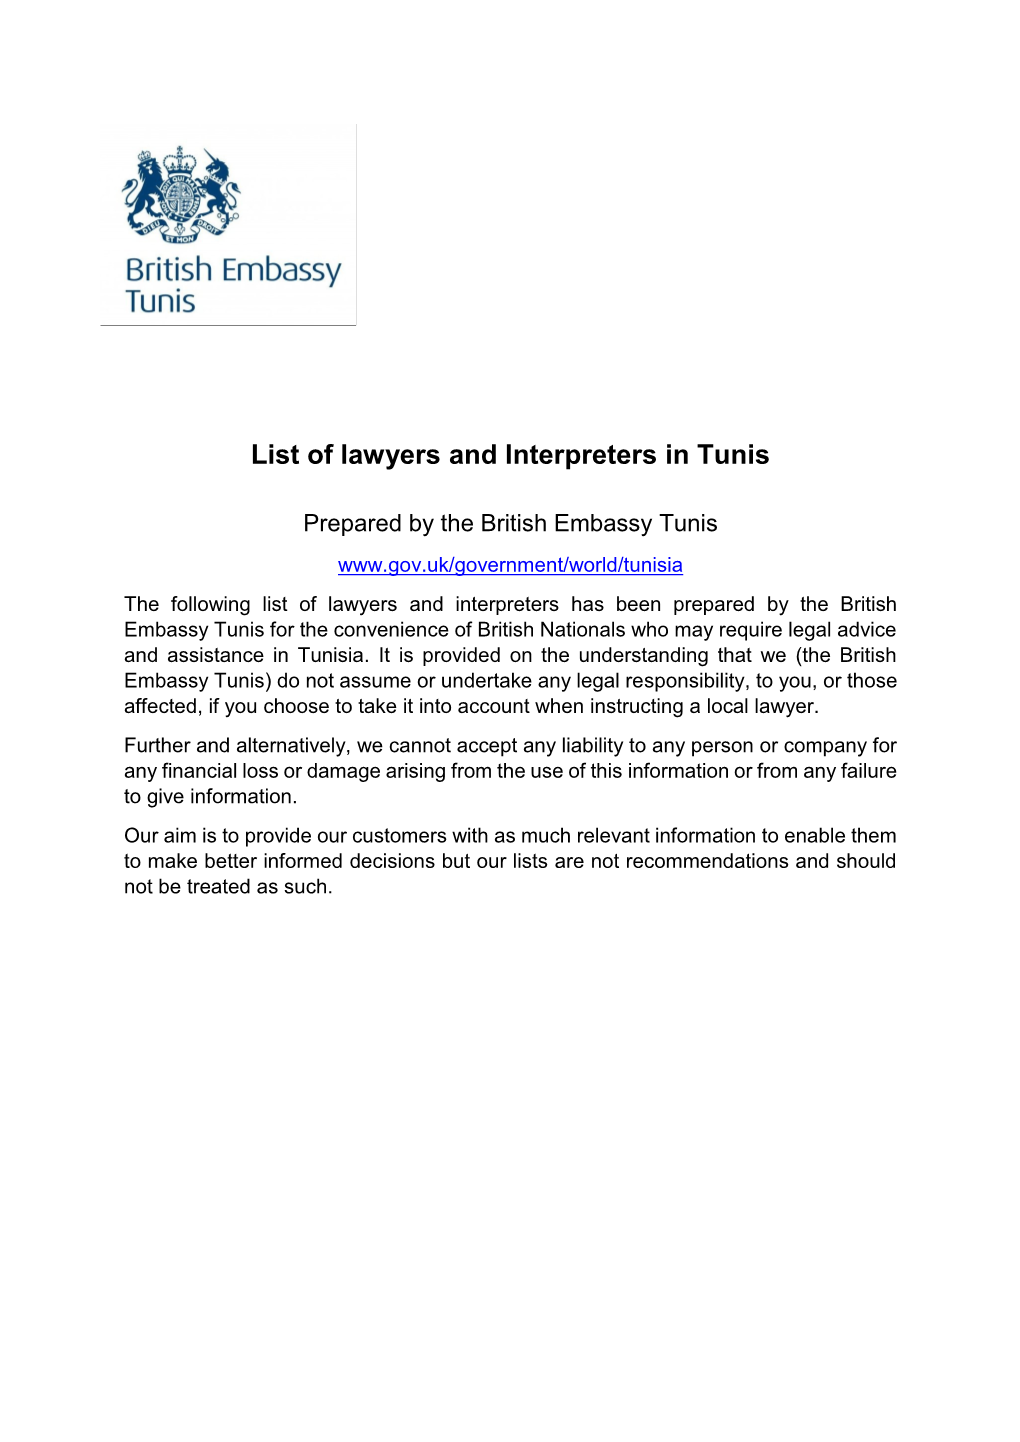 List of Lawyers and Interpreters in Tunis